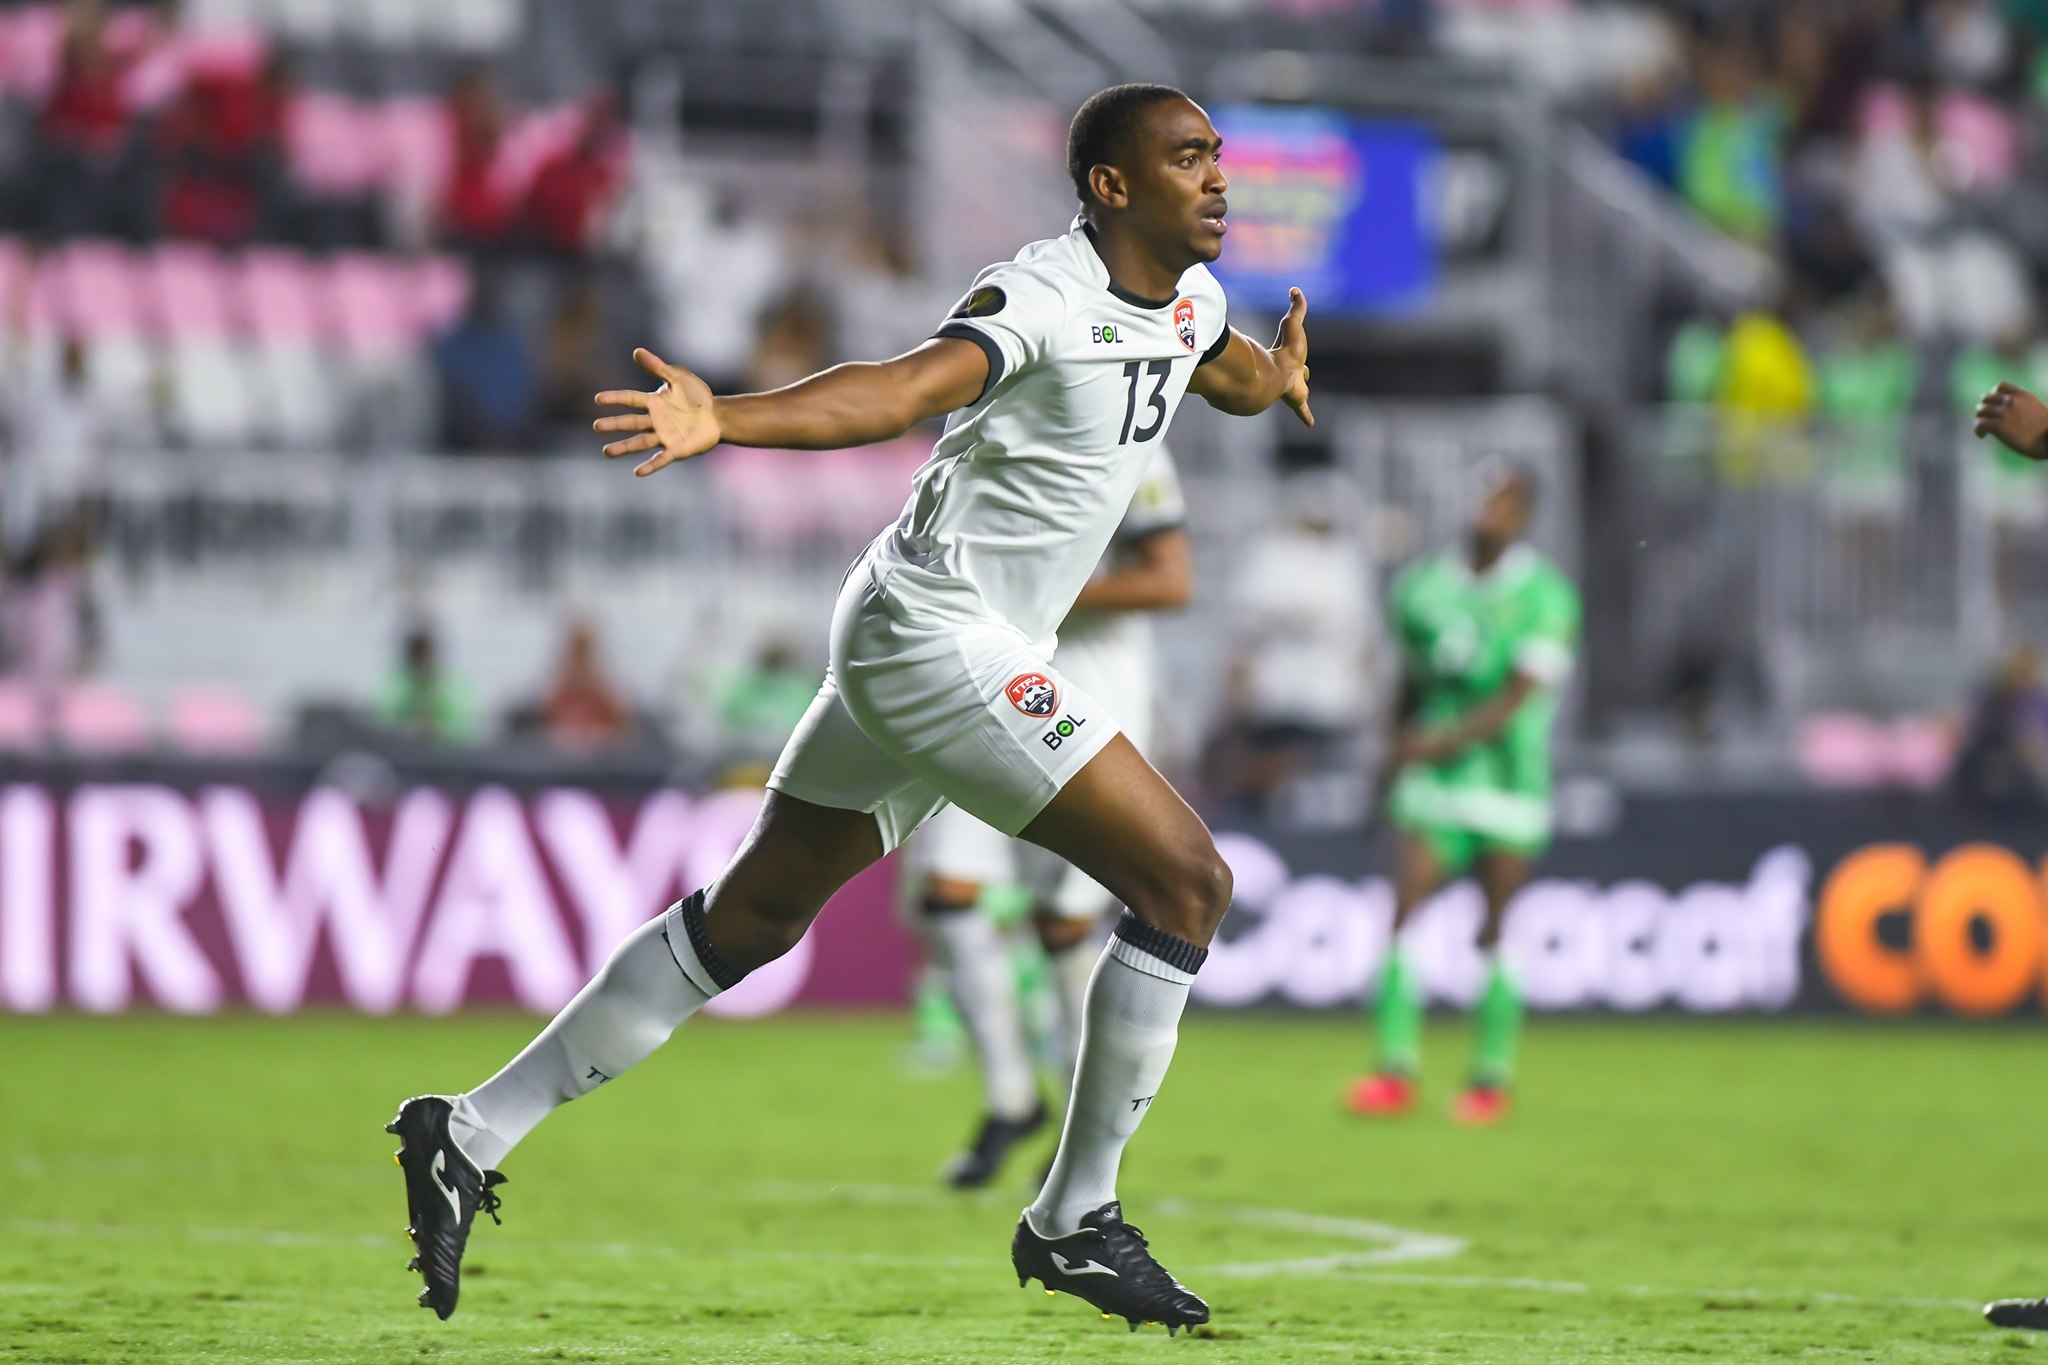 Trinidad and Tobago's Reon Moore celebrates after scoring a goal during a 2021 Concacaf Gold Cup Preliminary Round match against Montserrat at the DRV PNK Stadium, Ft. Lauderdale, FL on Friday, July 2nd 2021.